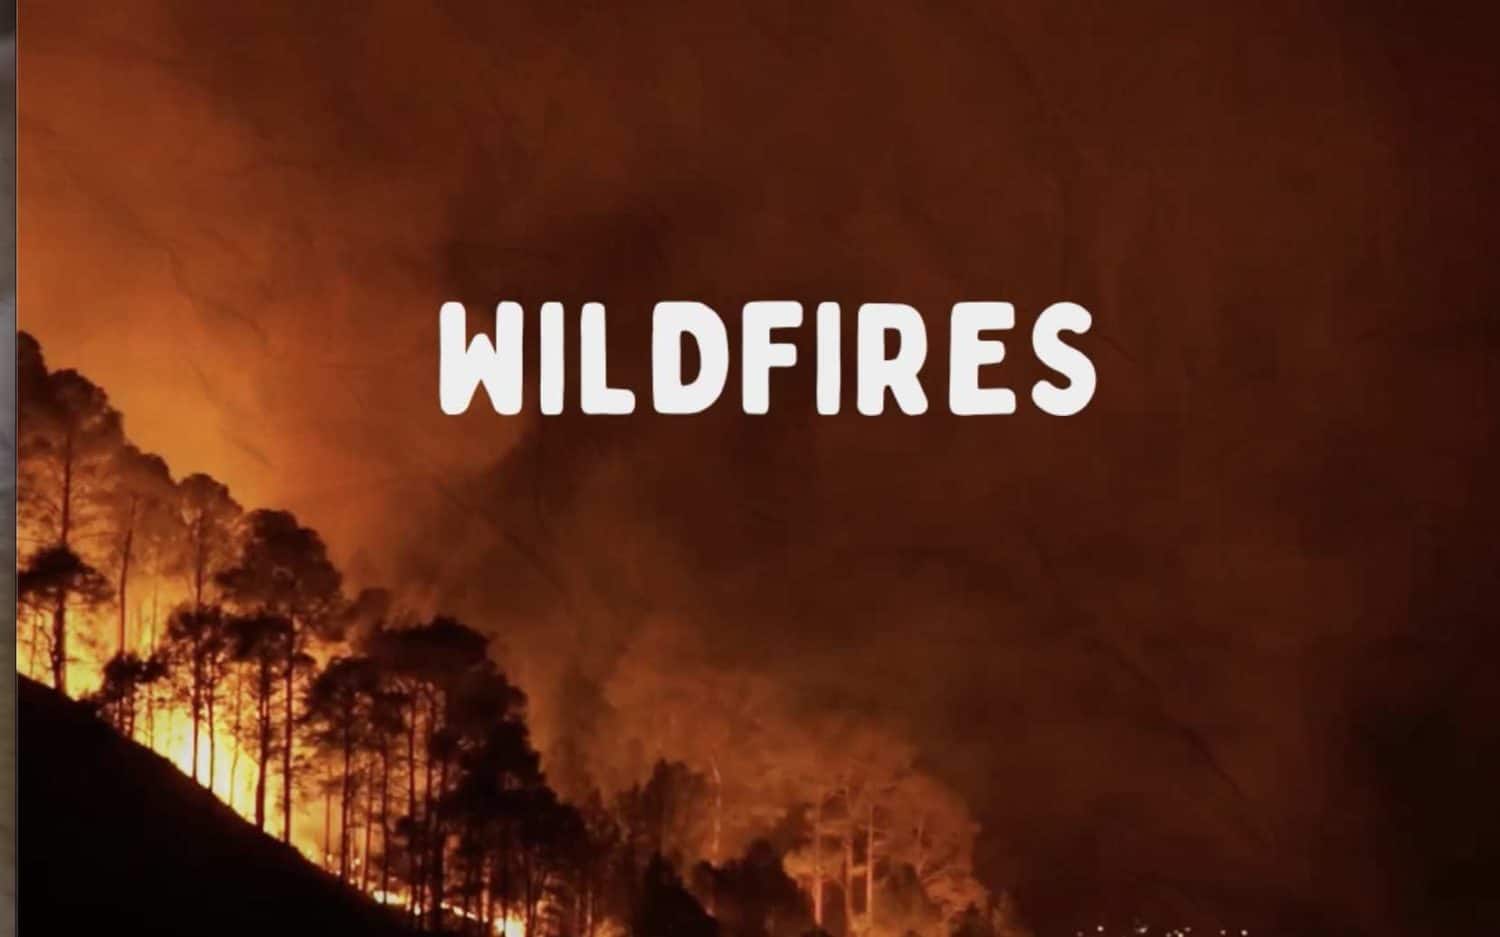 Wildfires are devastating many parts of the world due to man made climate change.